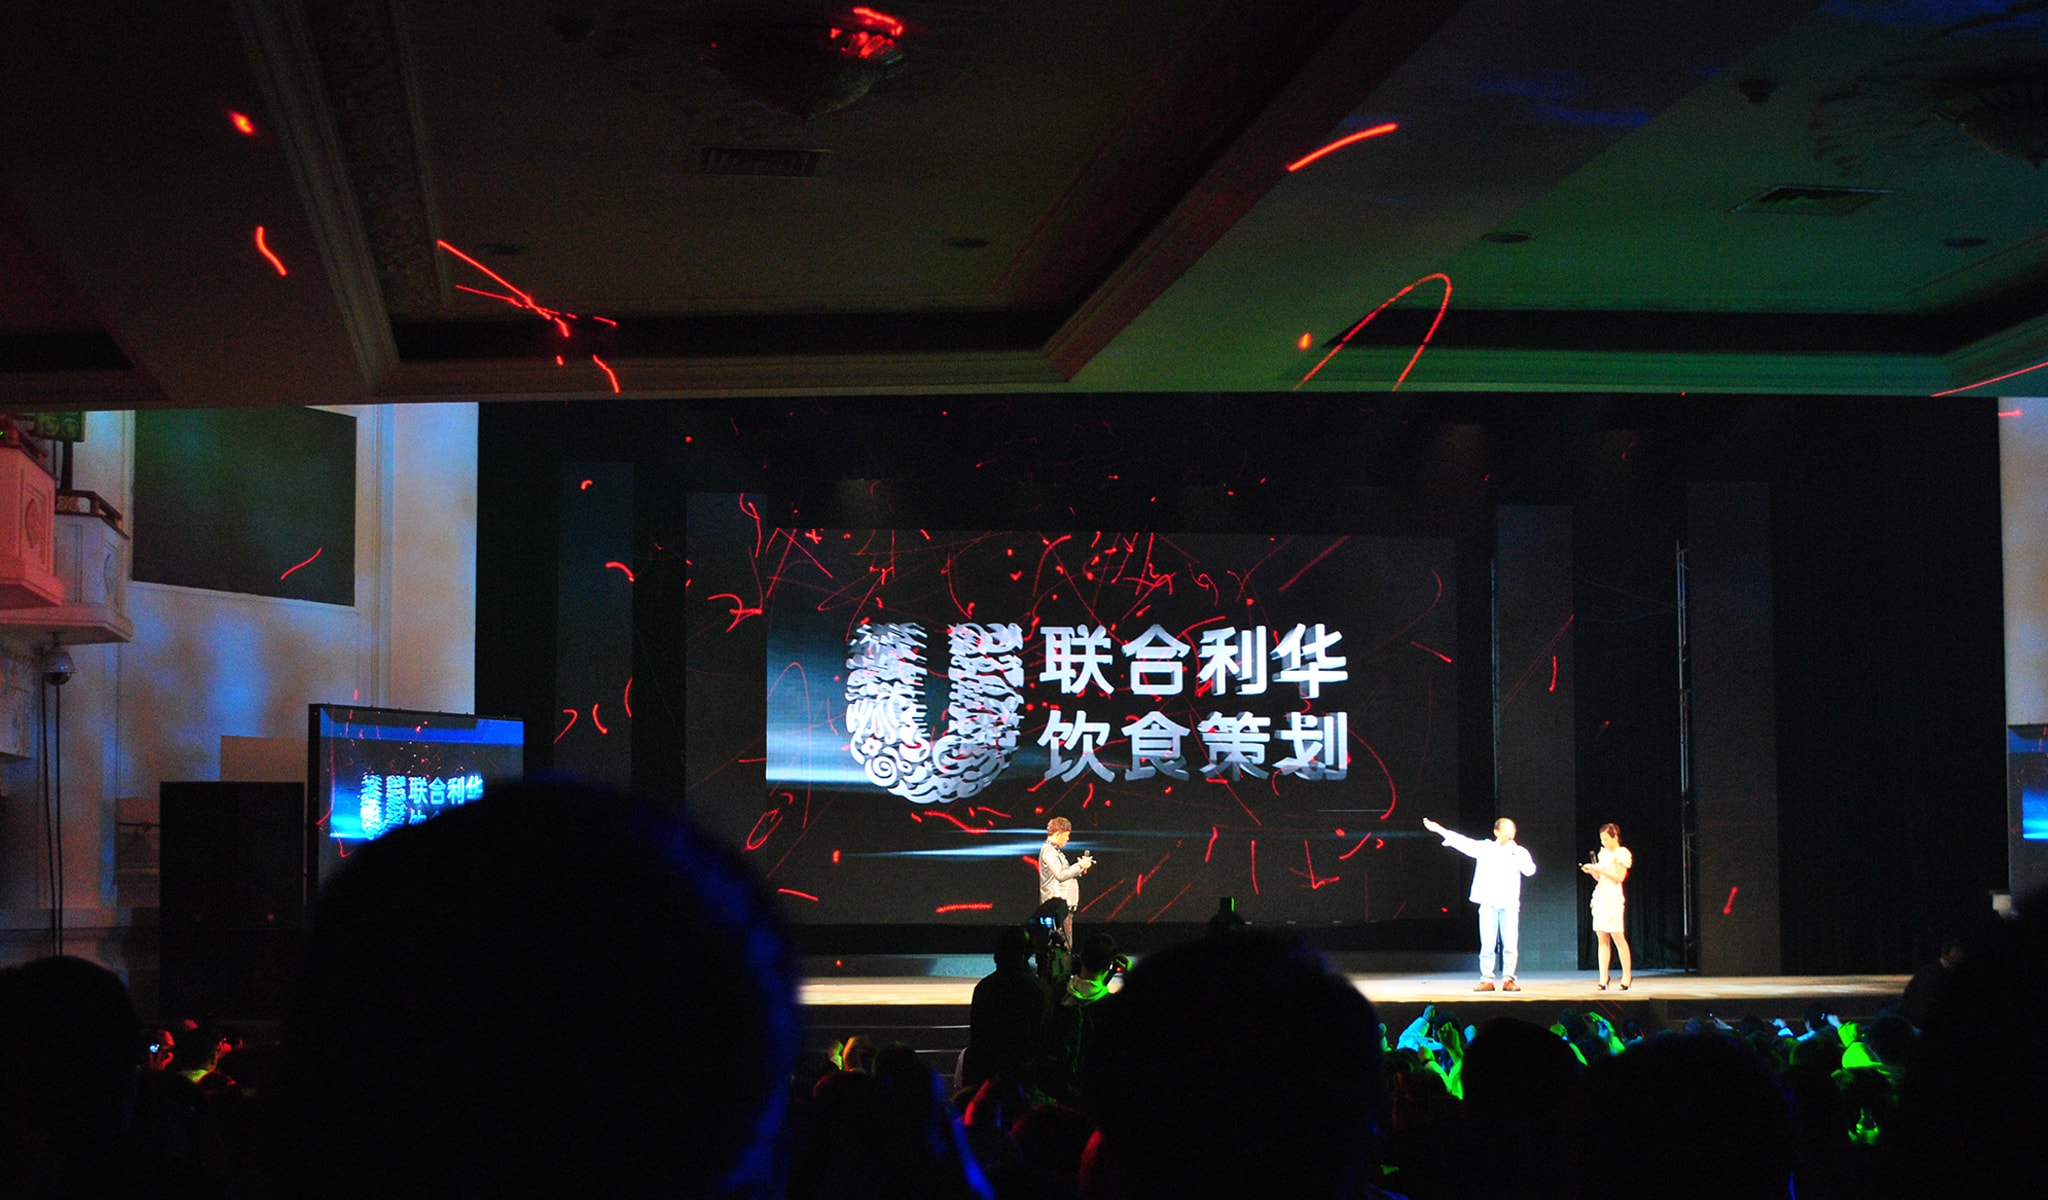 Space Design for Unilever China